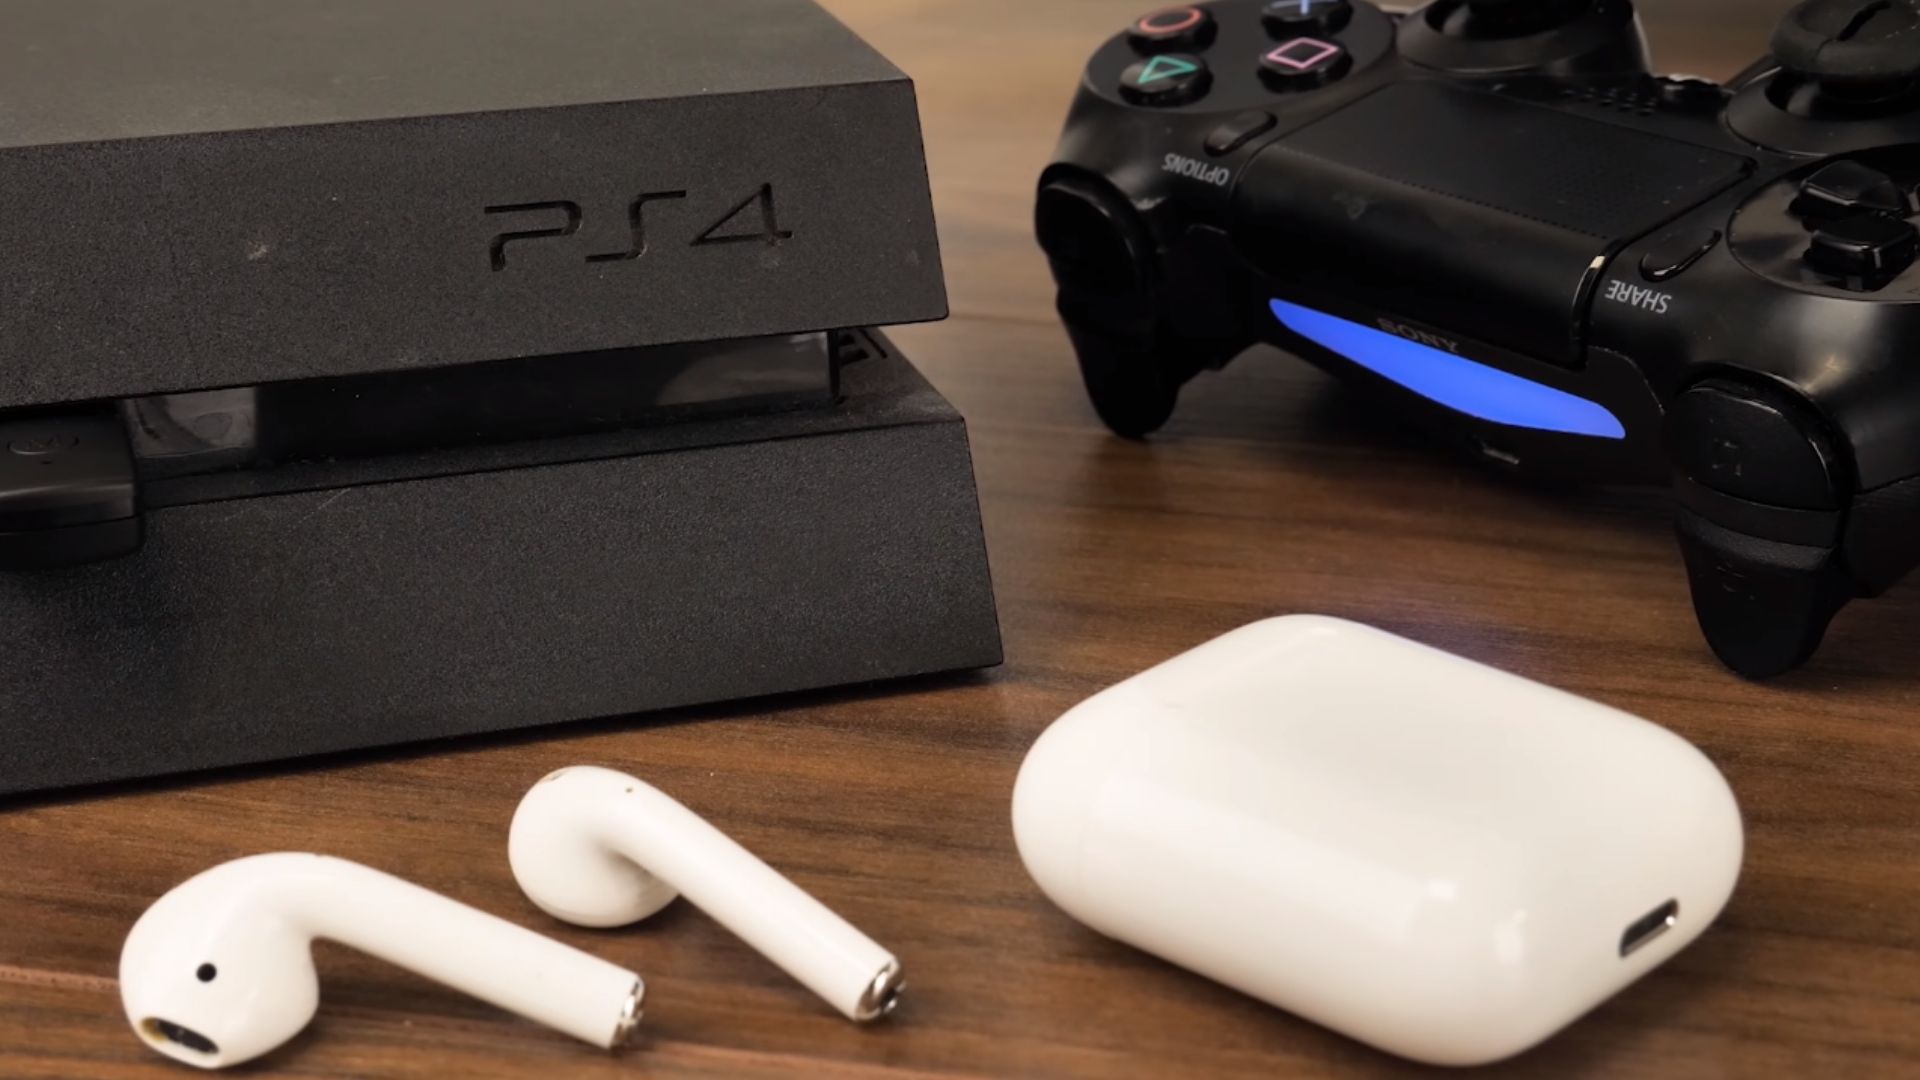 How To Connect AirPods To Ps4? â Simple Method To Connect